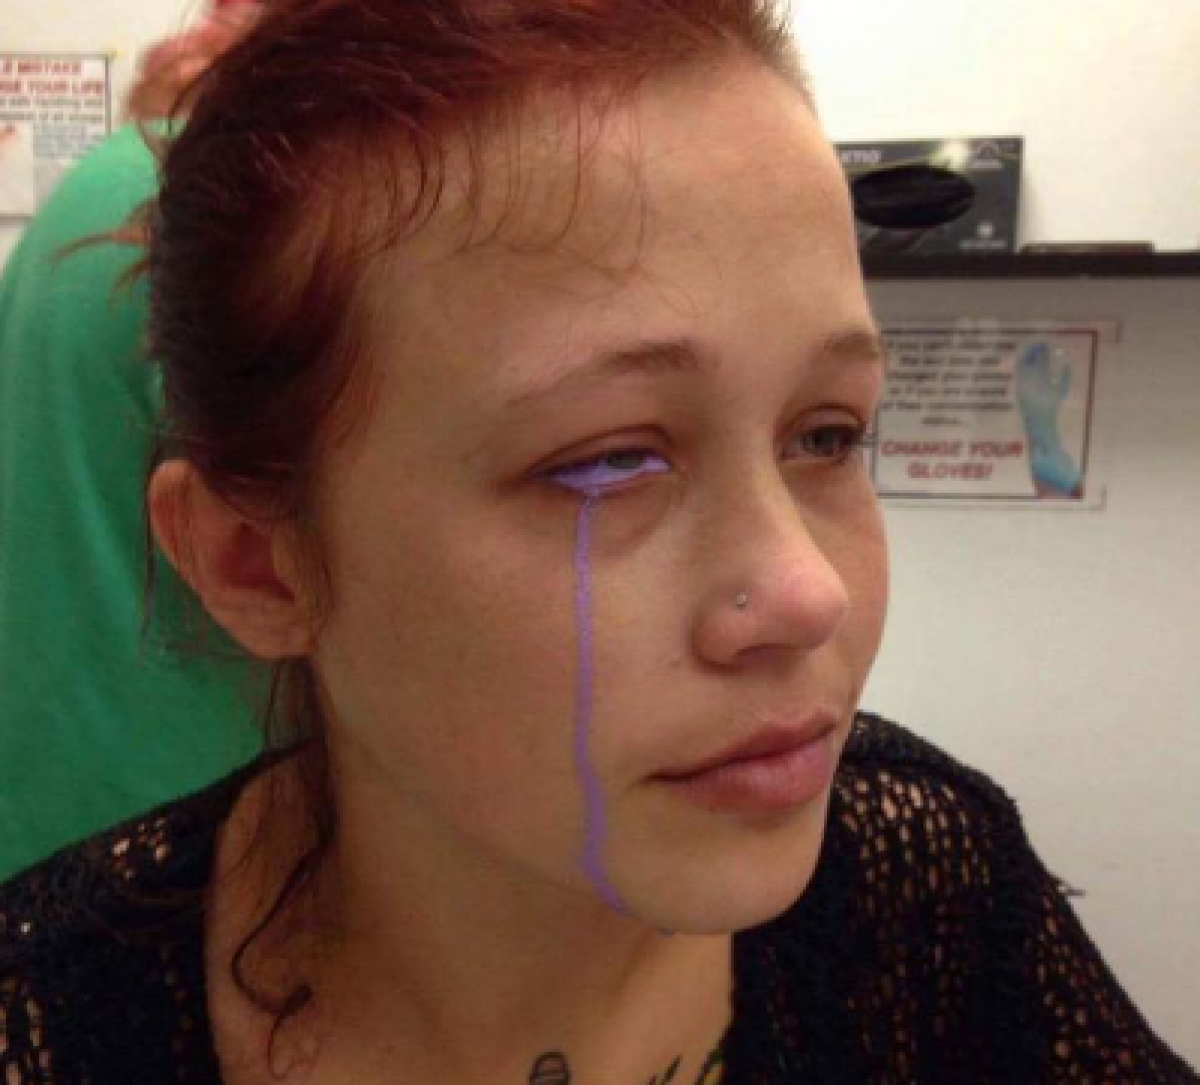 Model goes blind after tattooing eyeball, warns others of dangers